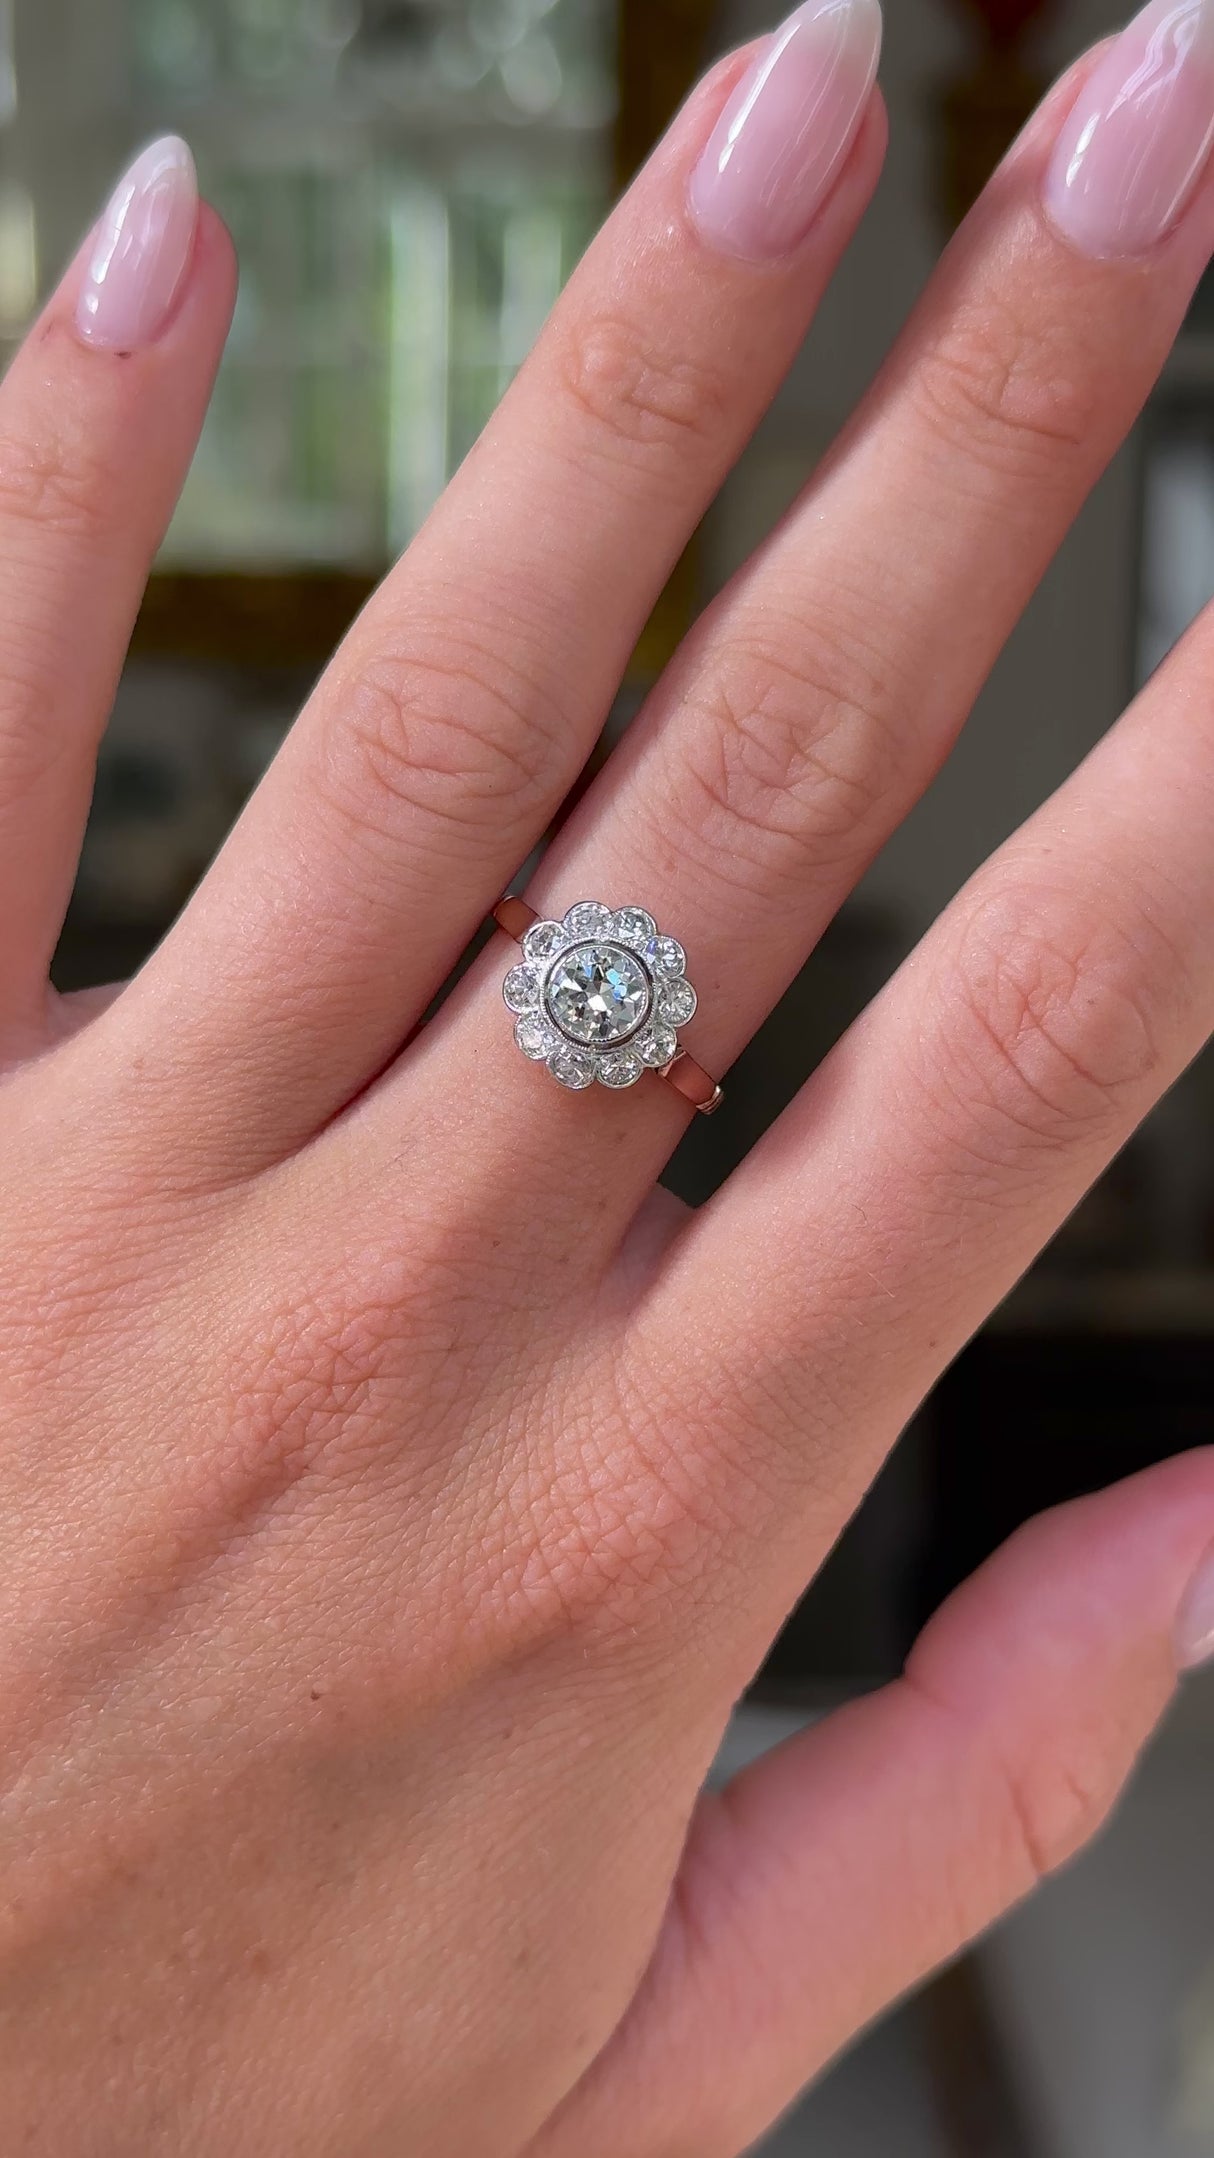 antique diamond cluster engagement ring, worn on hand and moved away from lens to give perspective, front view.